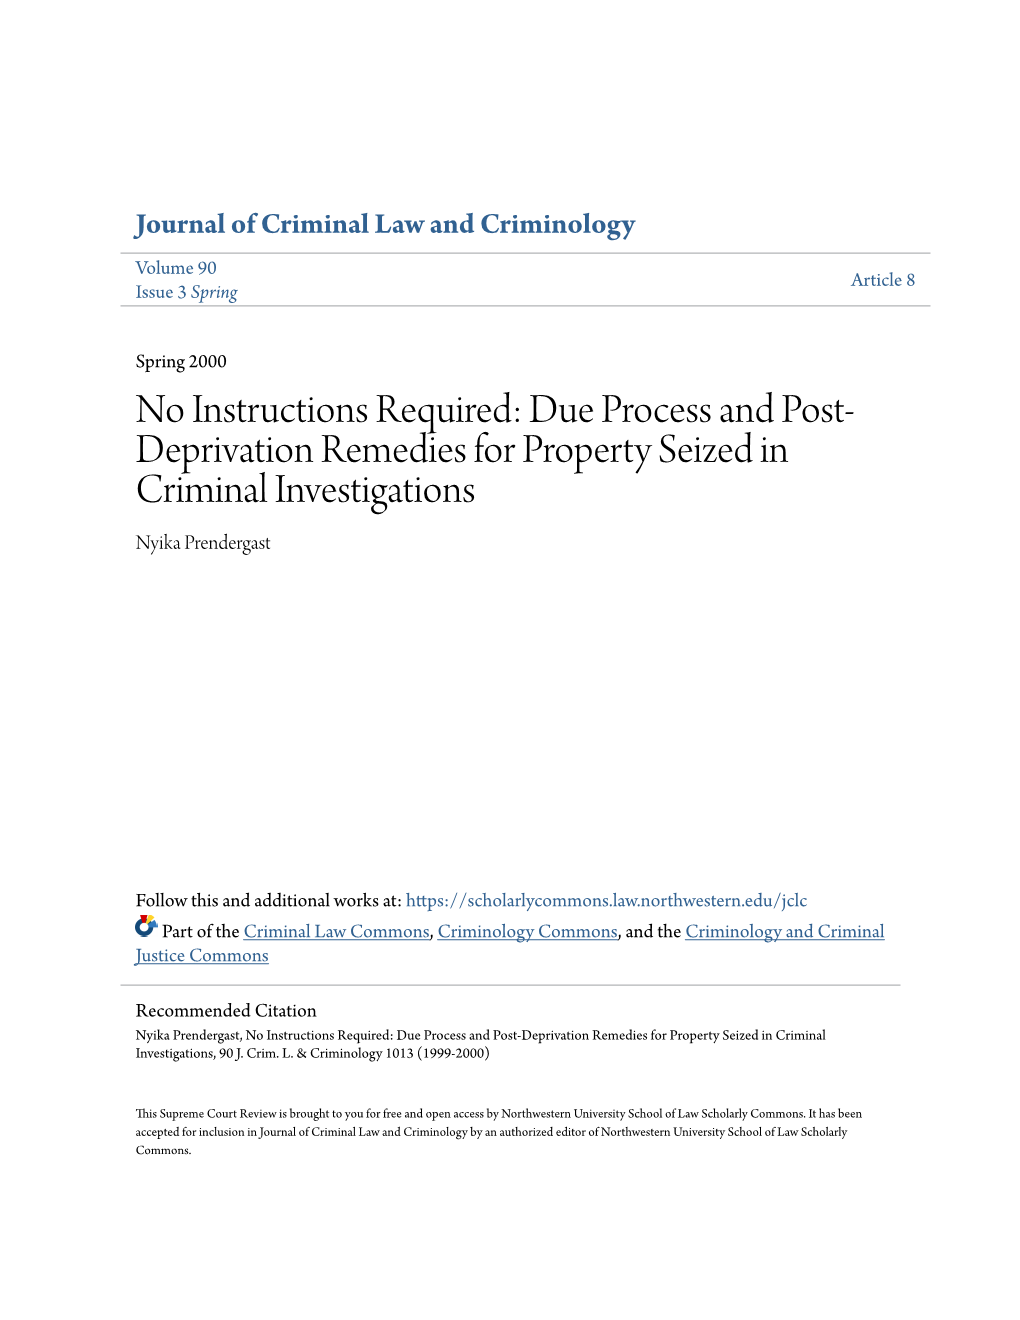 Due Process and Post-Deprivation Remedies for Property Seized in Criminal Investigations, 90 J